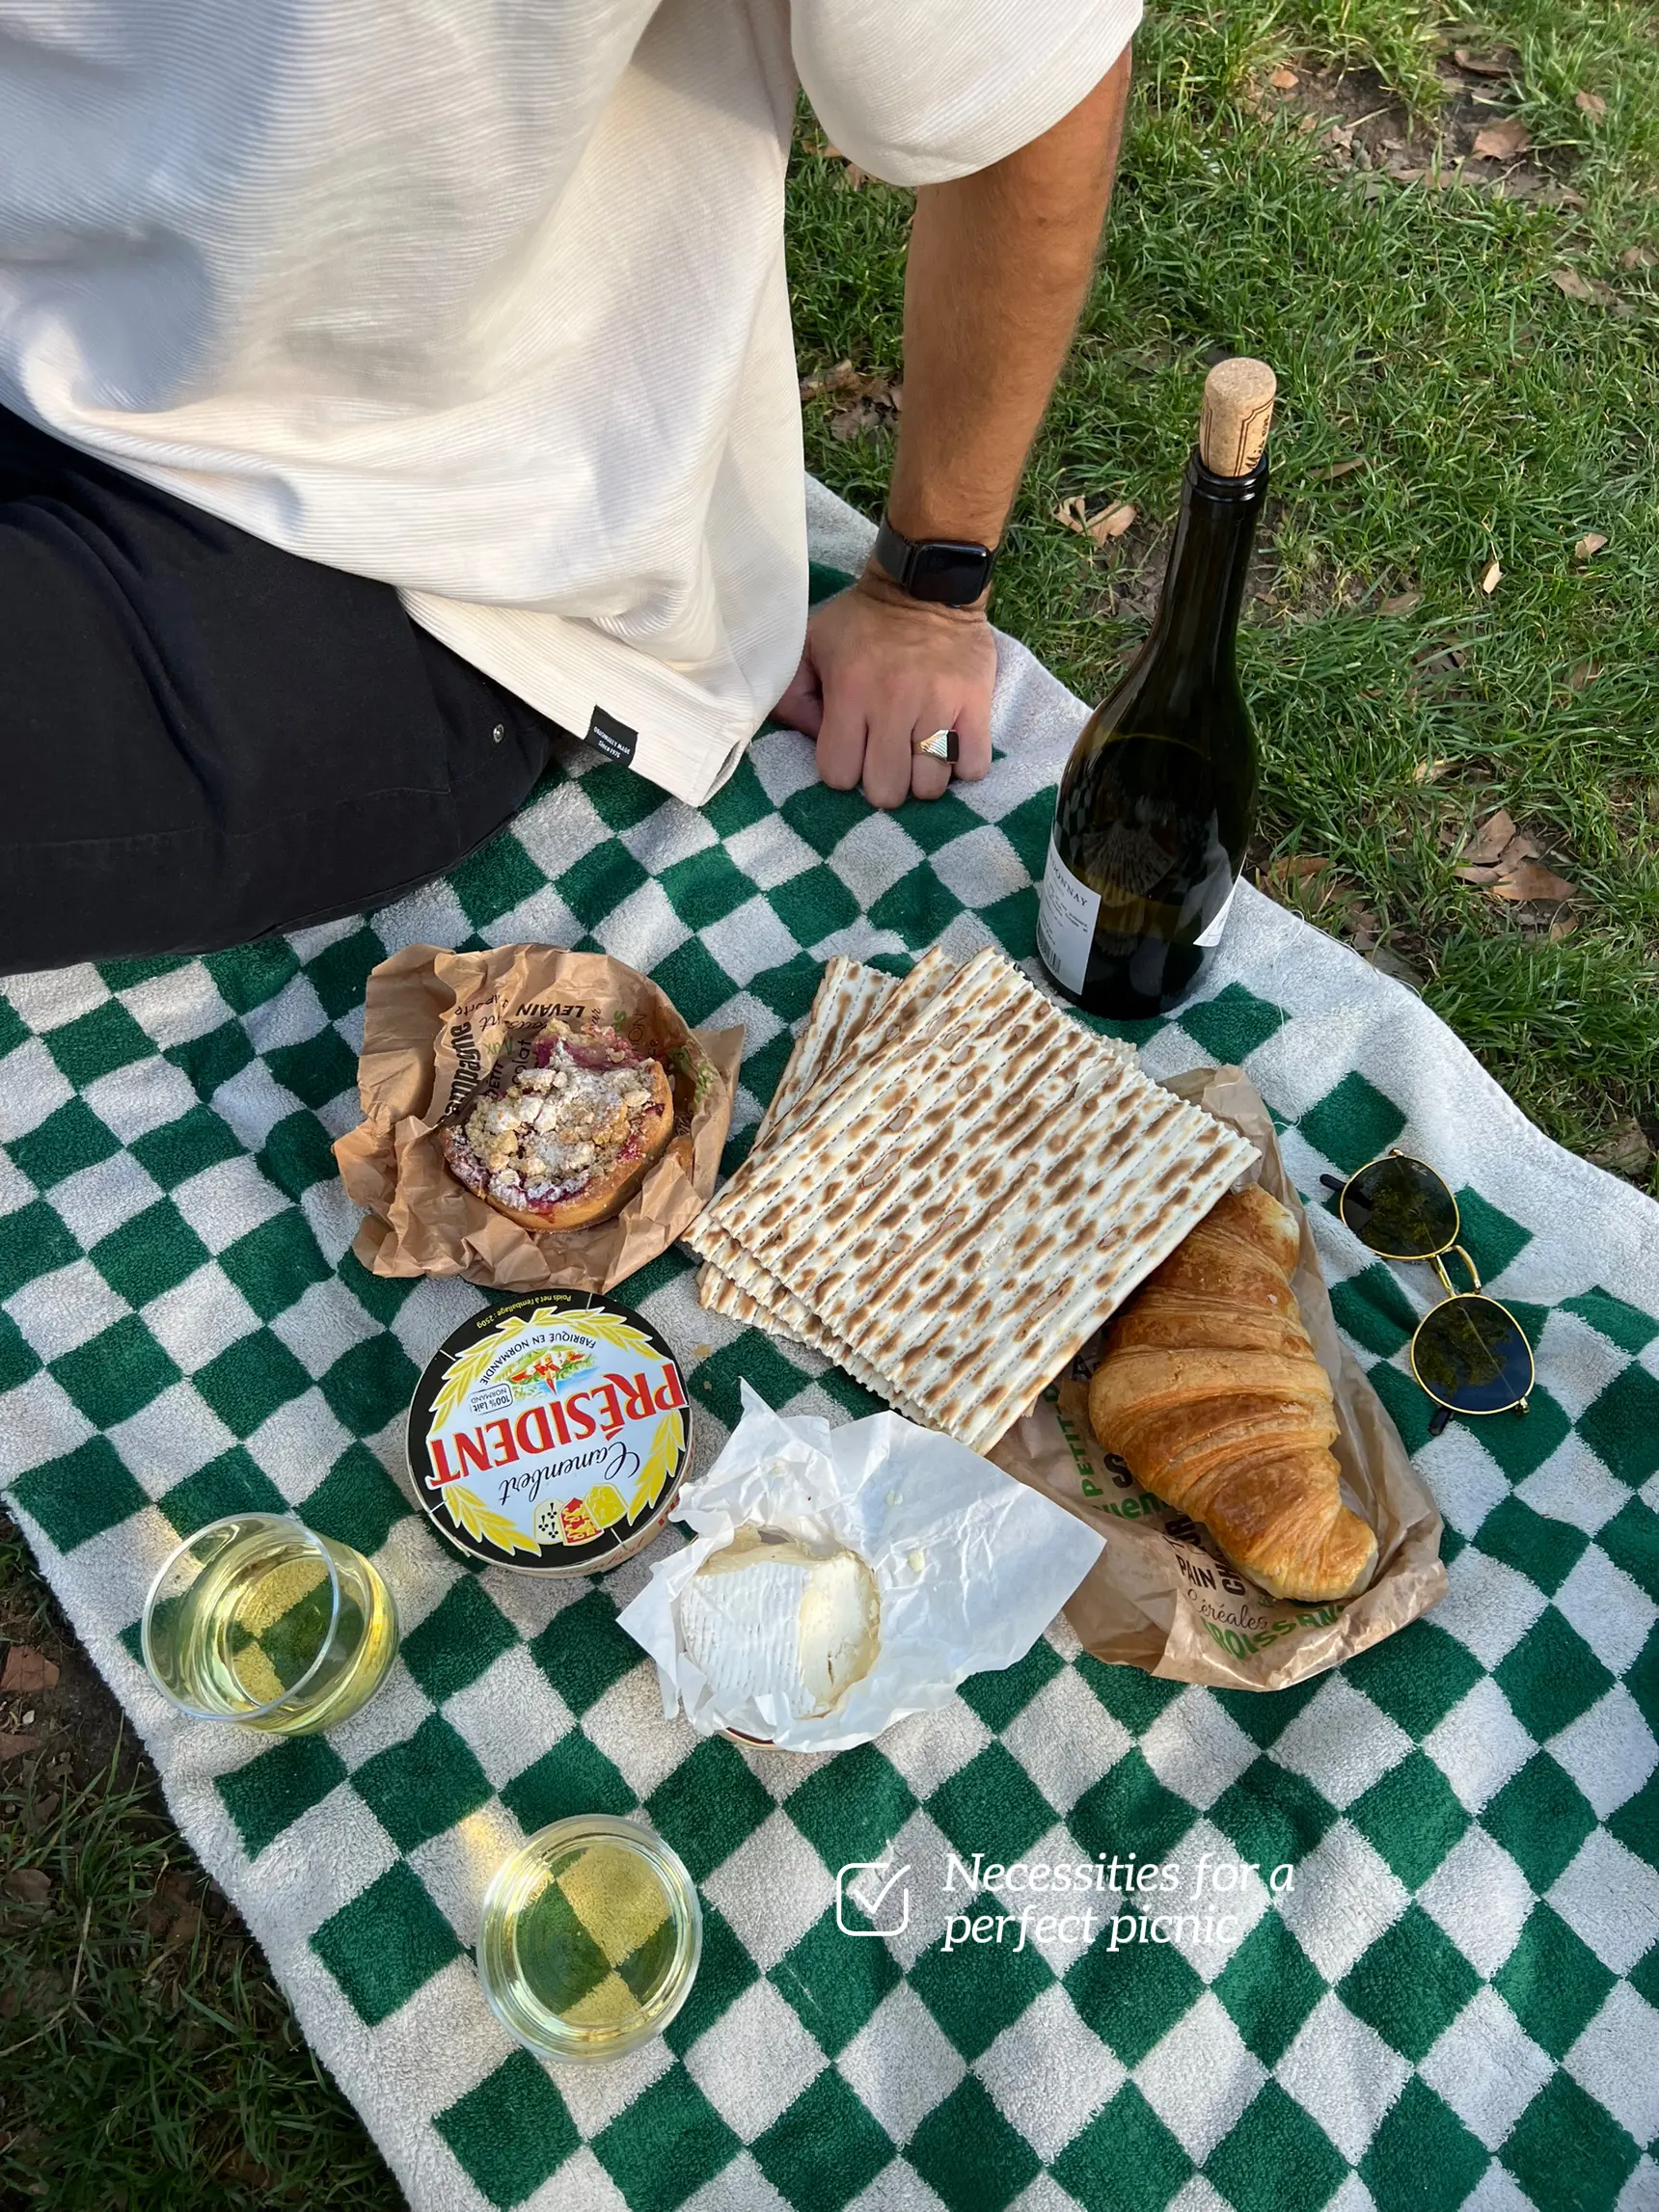 BrüMate - Your perfect picnic partner has arrived 🥂. Our stemless